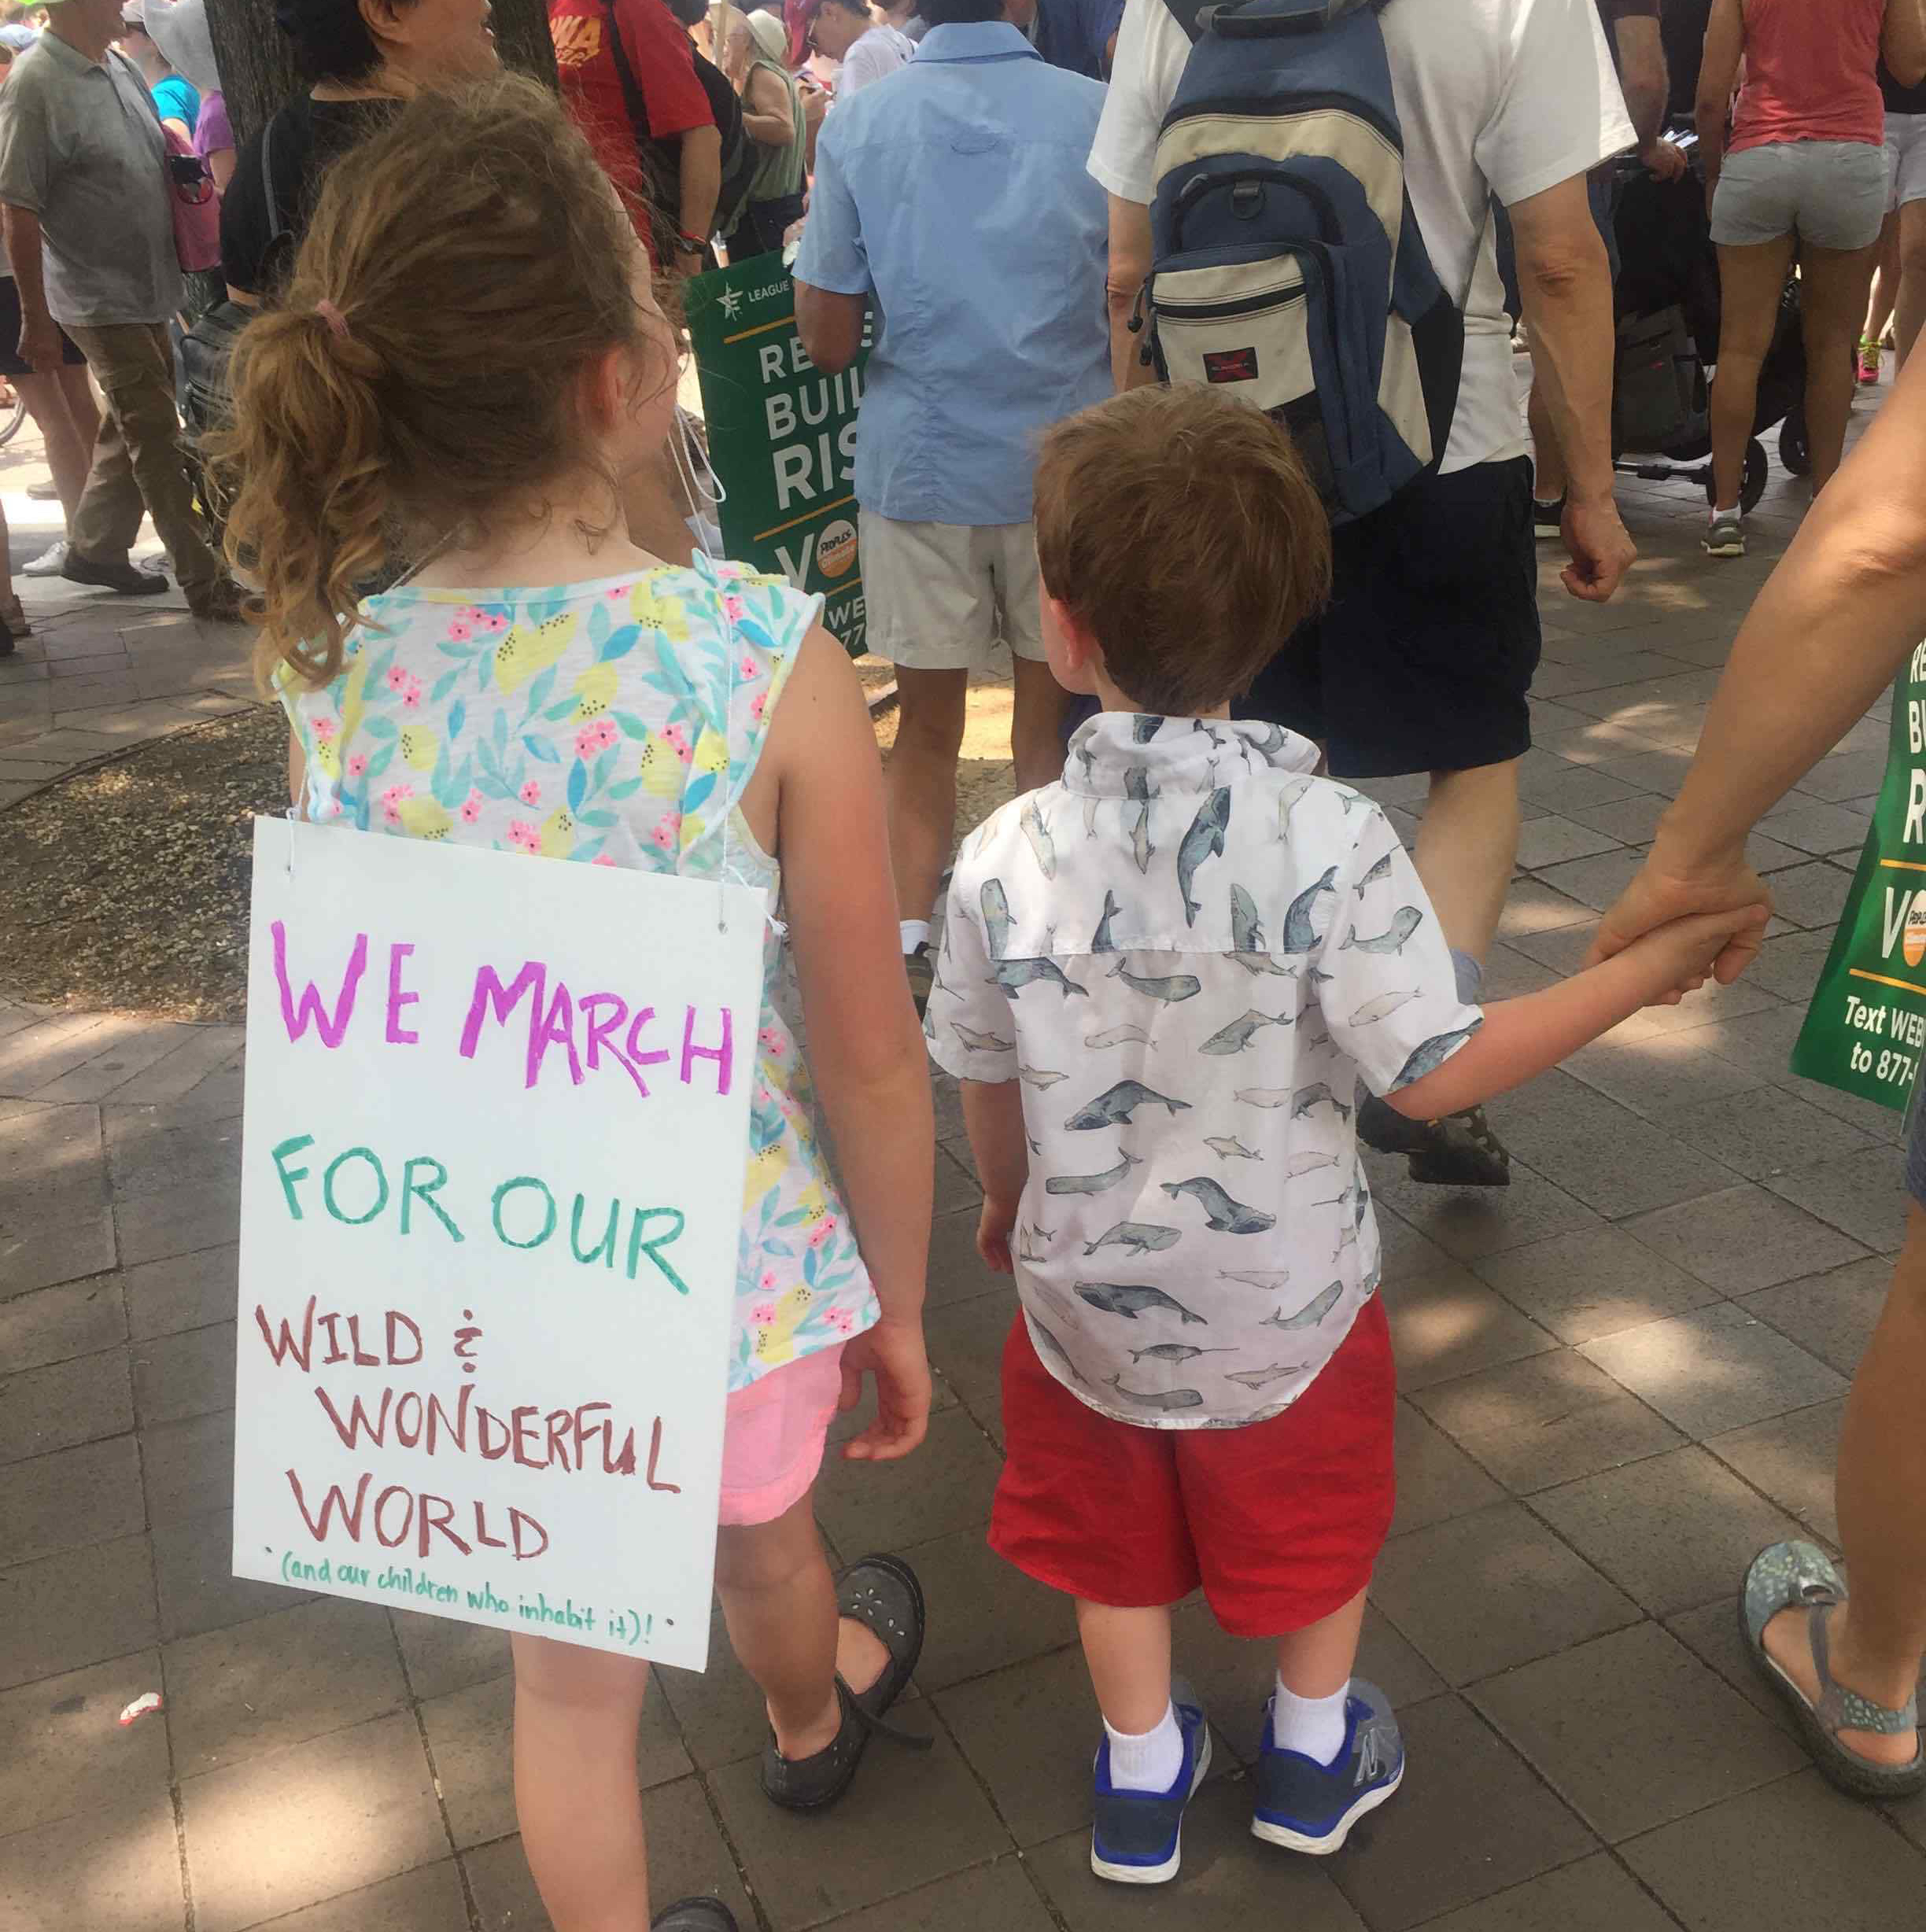 Photo: Two kids walking, one with a sign saying "We march for our wild and wonderful world."